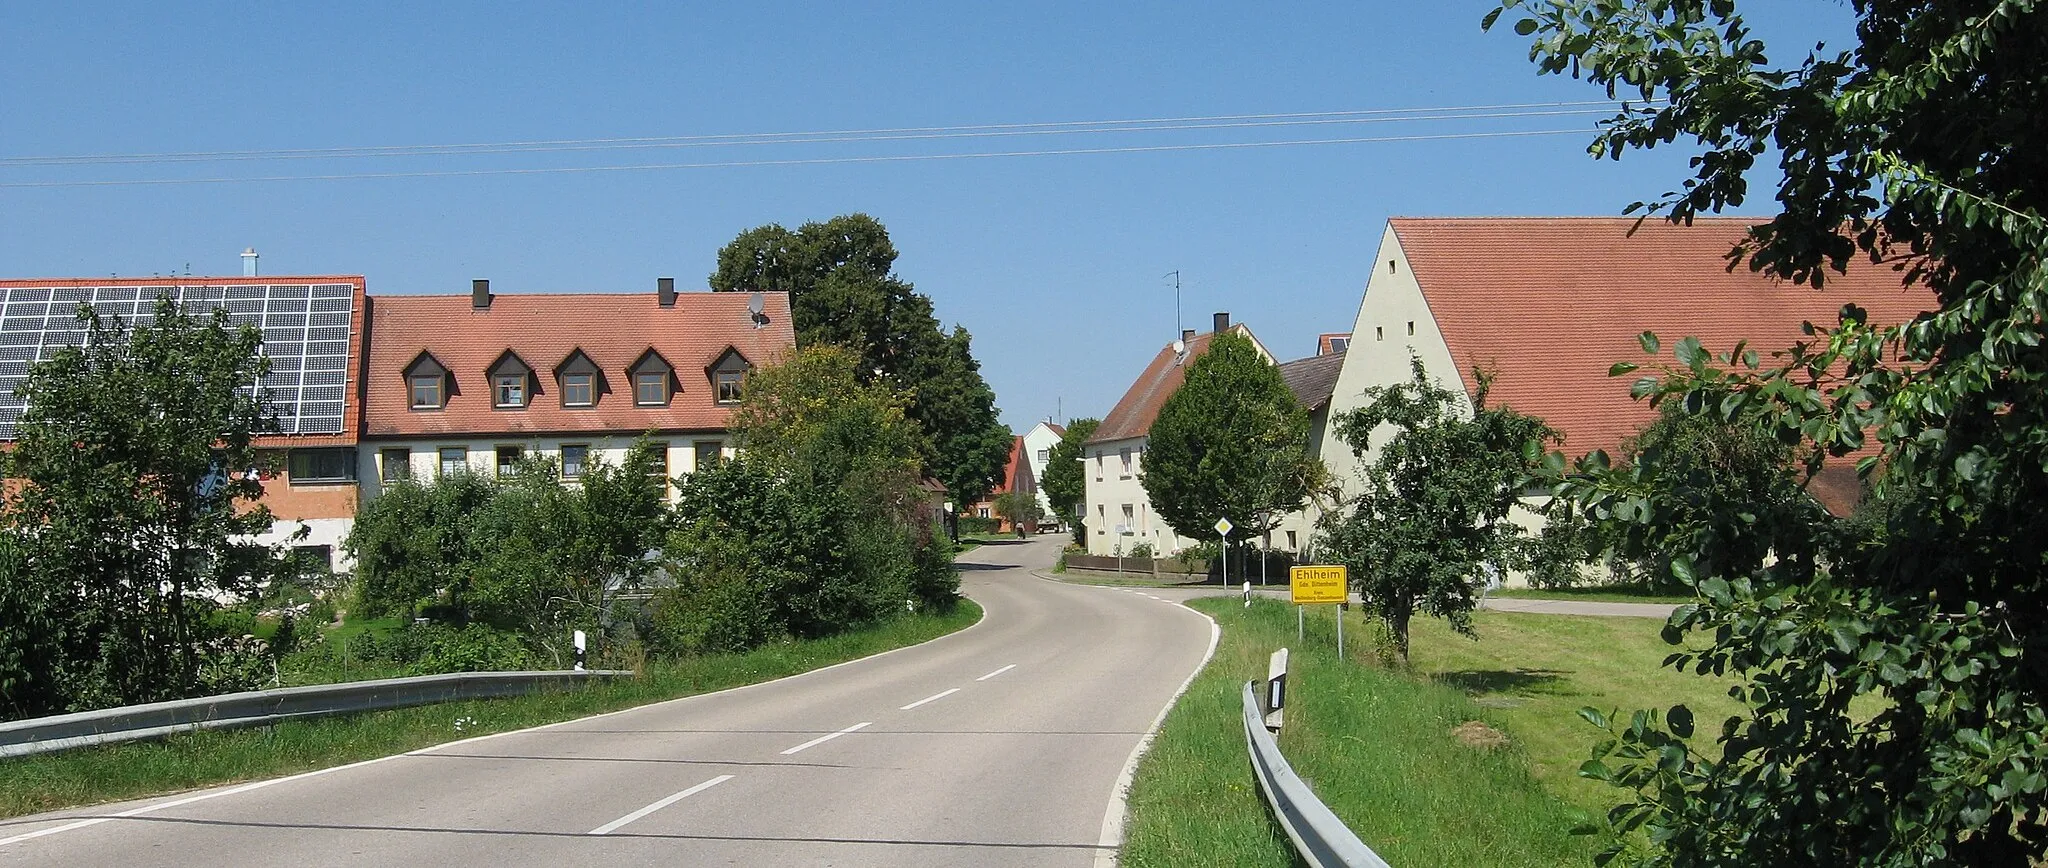 Photo showing: Ehlheim, part of Dittenheim, Bavaria, Germany, from southeast